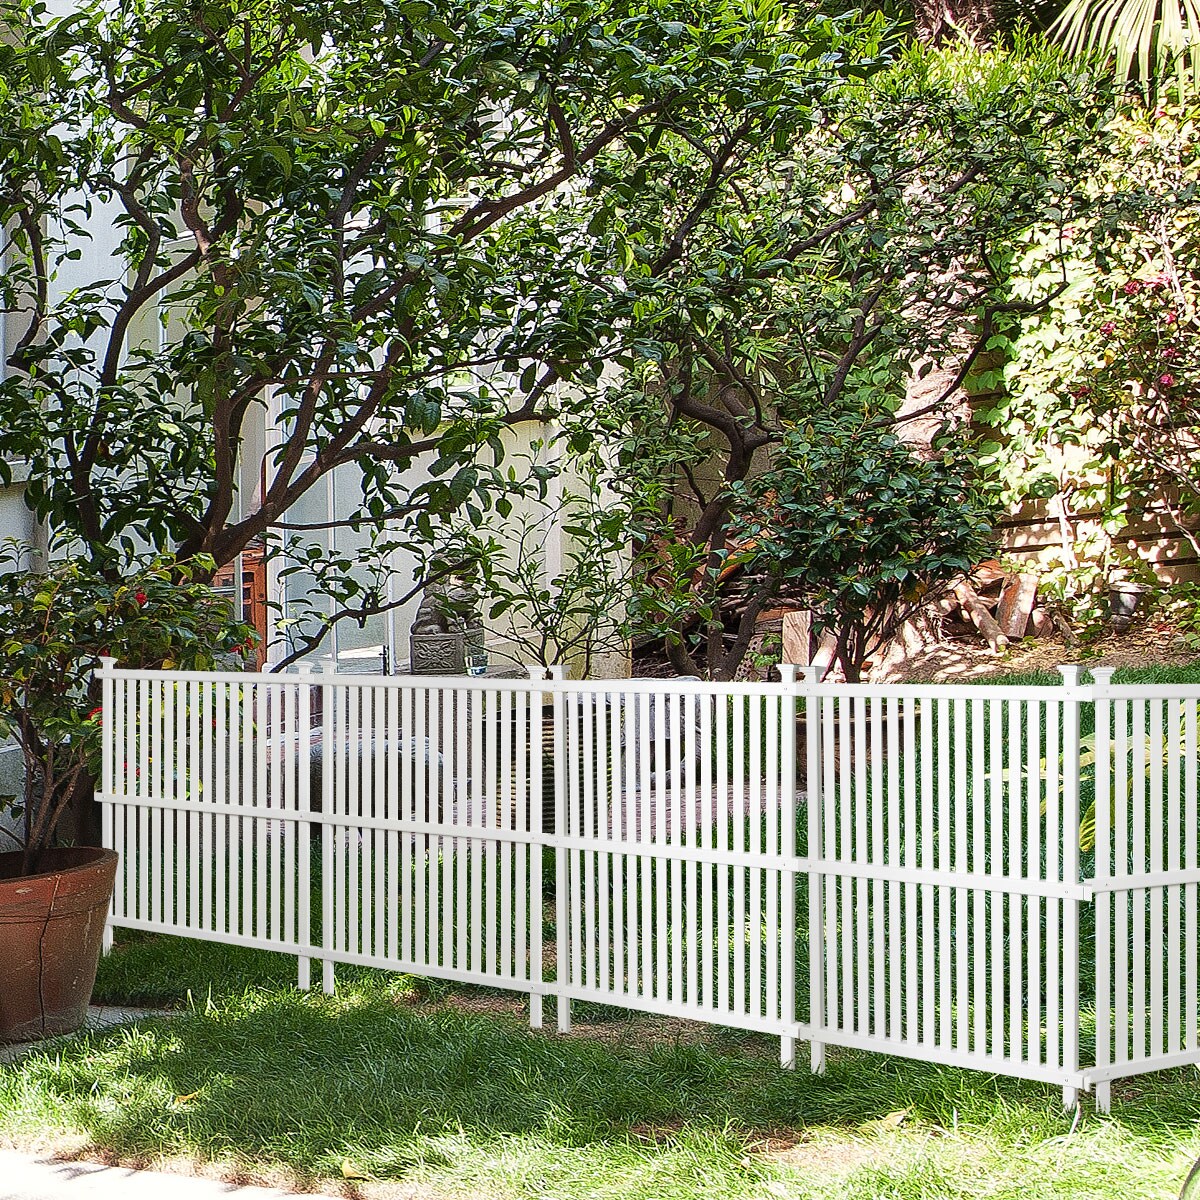 36”x 48” Modern Garden Outdoor Fence Privacy Screen Space Divider 2-Panel White 